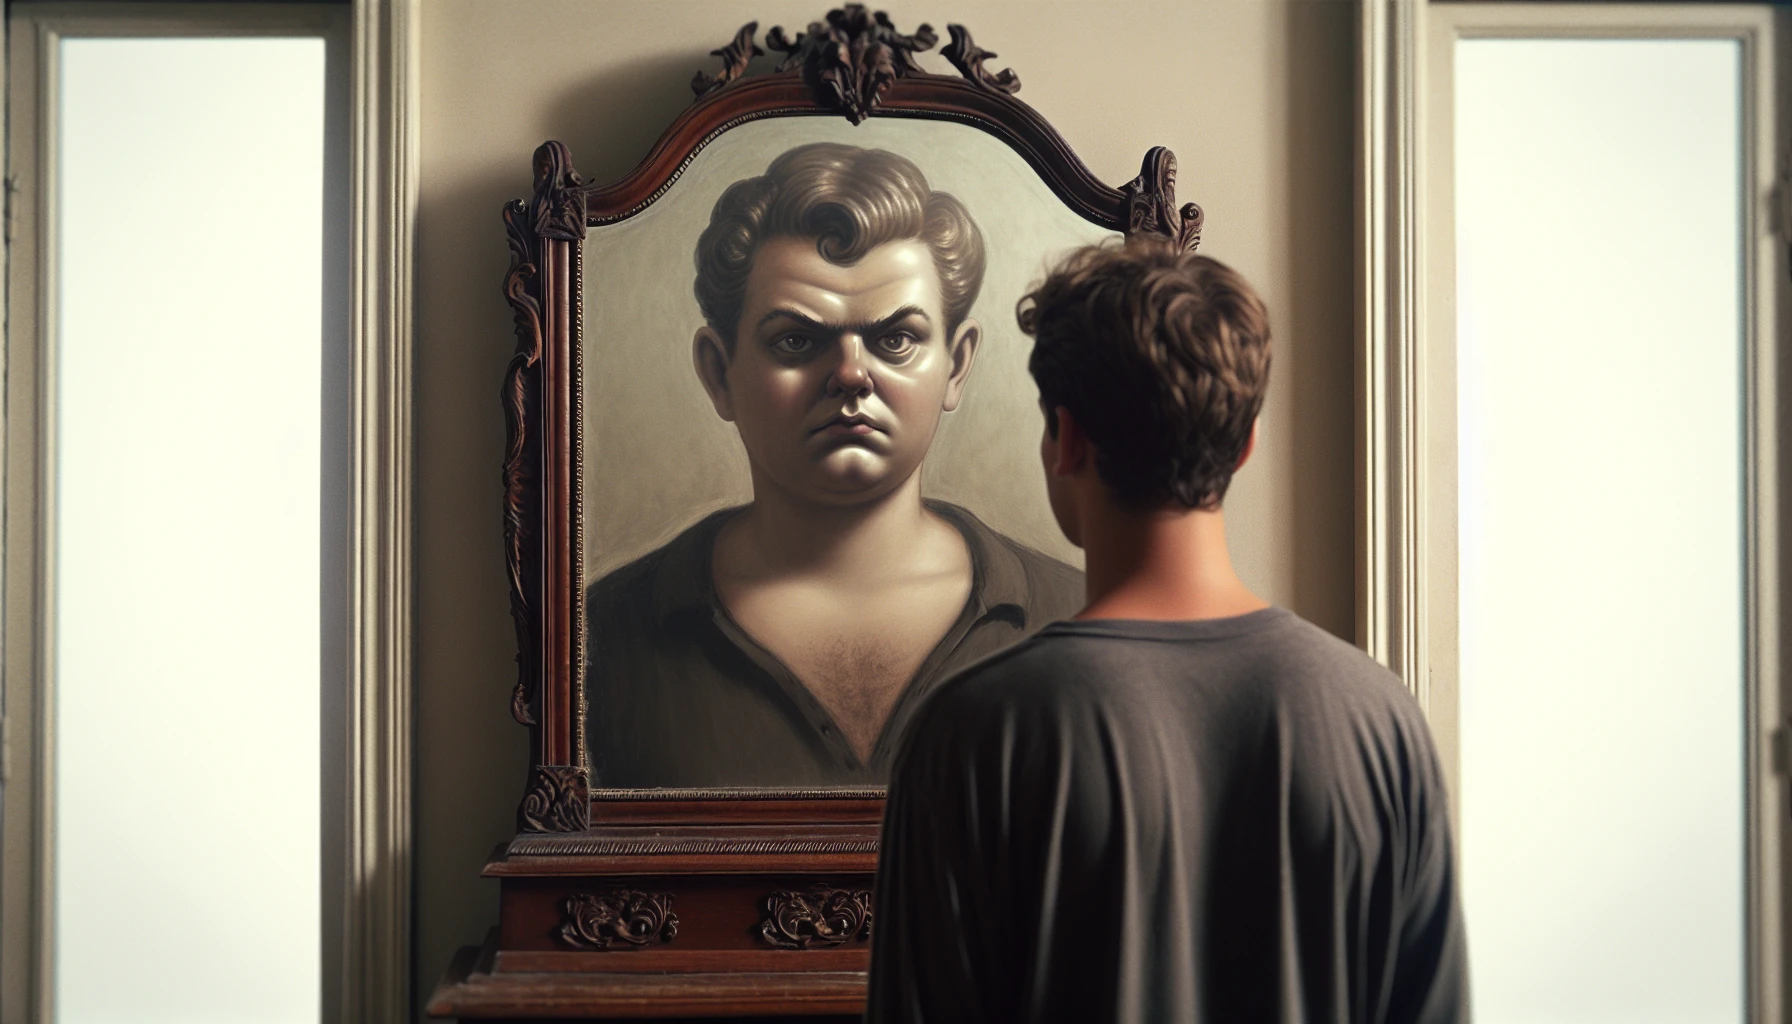 Illustration of a person looking in the mirror with an exaggeratedly large reflection, symbolizing narcissistic traits